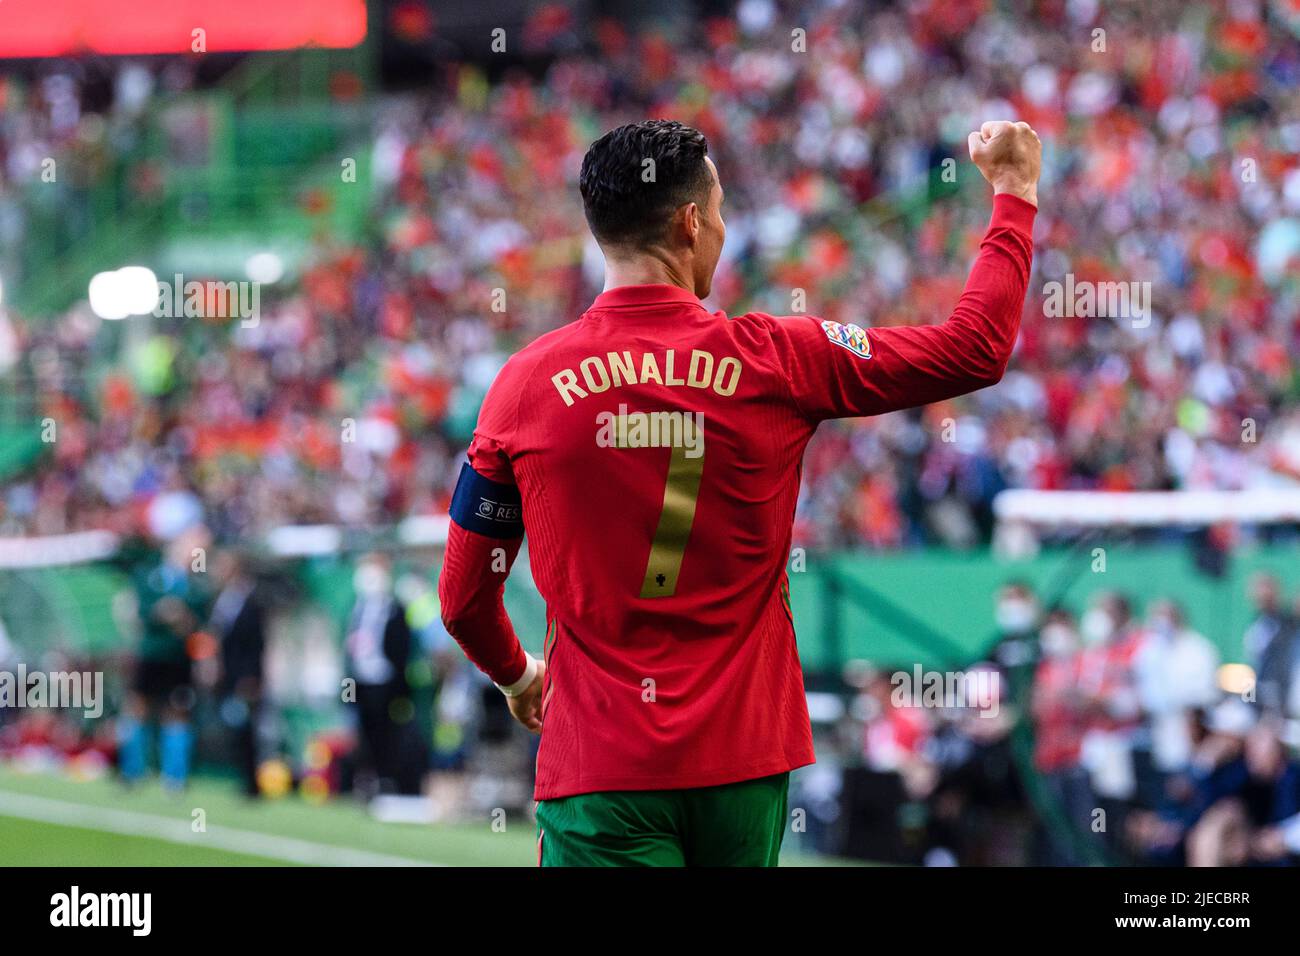 LISBON, PORTUGAL - JUNE 05: Cristiano Ronaldo celebrates his goal during  the UEFA Nations League League A Group 2 match between Portugal and  Switzerland at Estadio Jose Alvalade on June 5, 2022